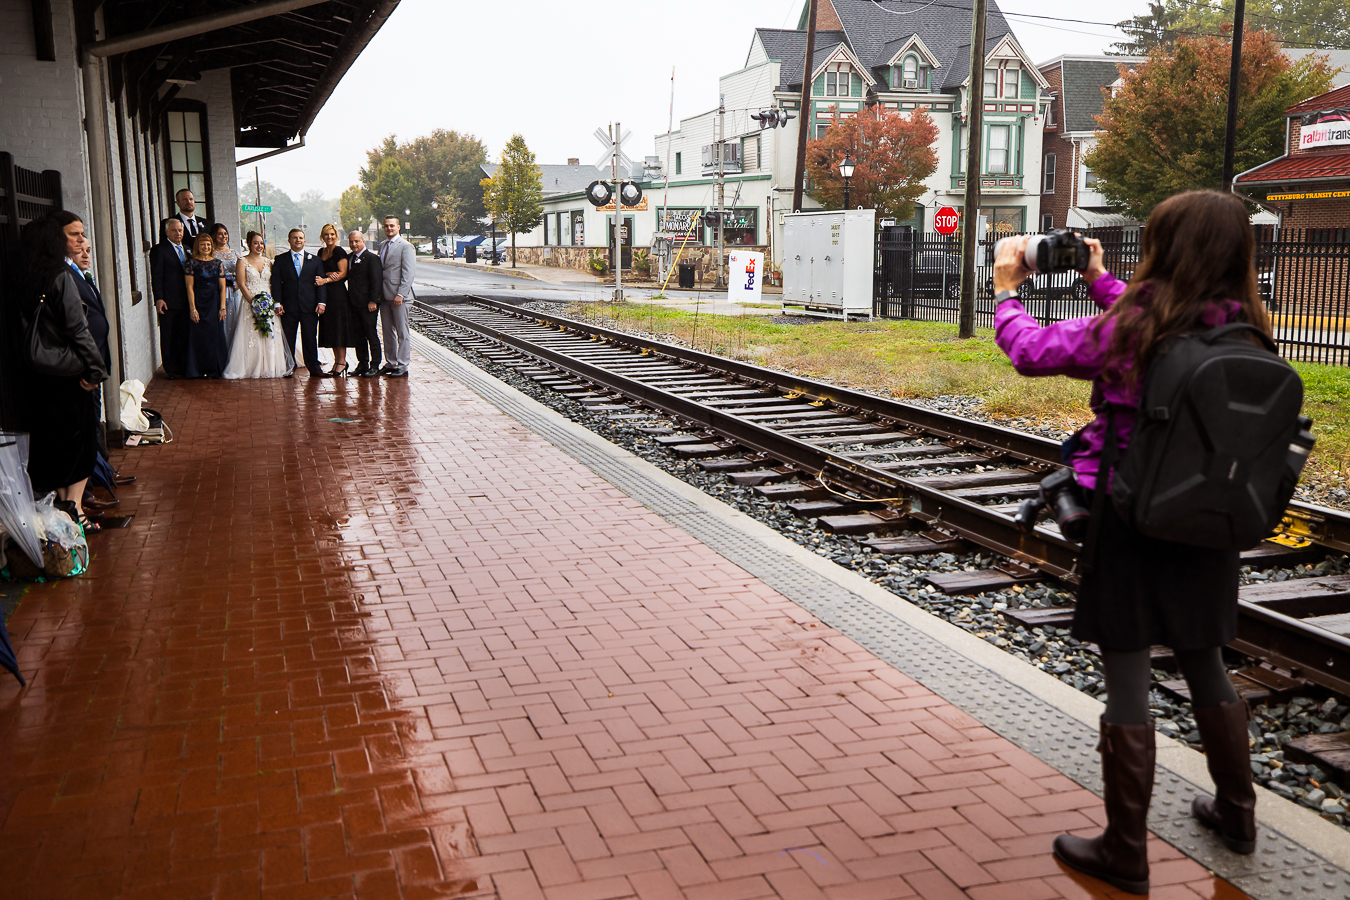 behind the scenes image of wedding photographer, lisa rhinehart, as she takes family portraits at lincoln railroad station in pa 